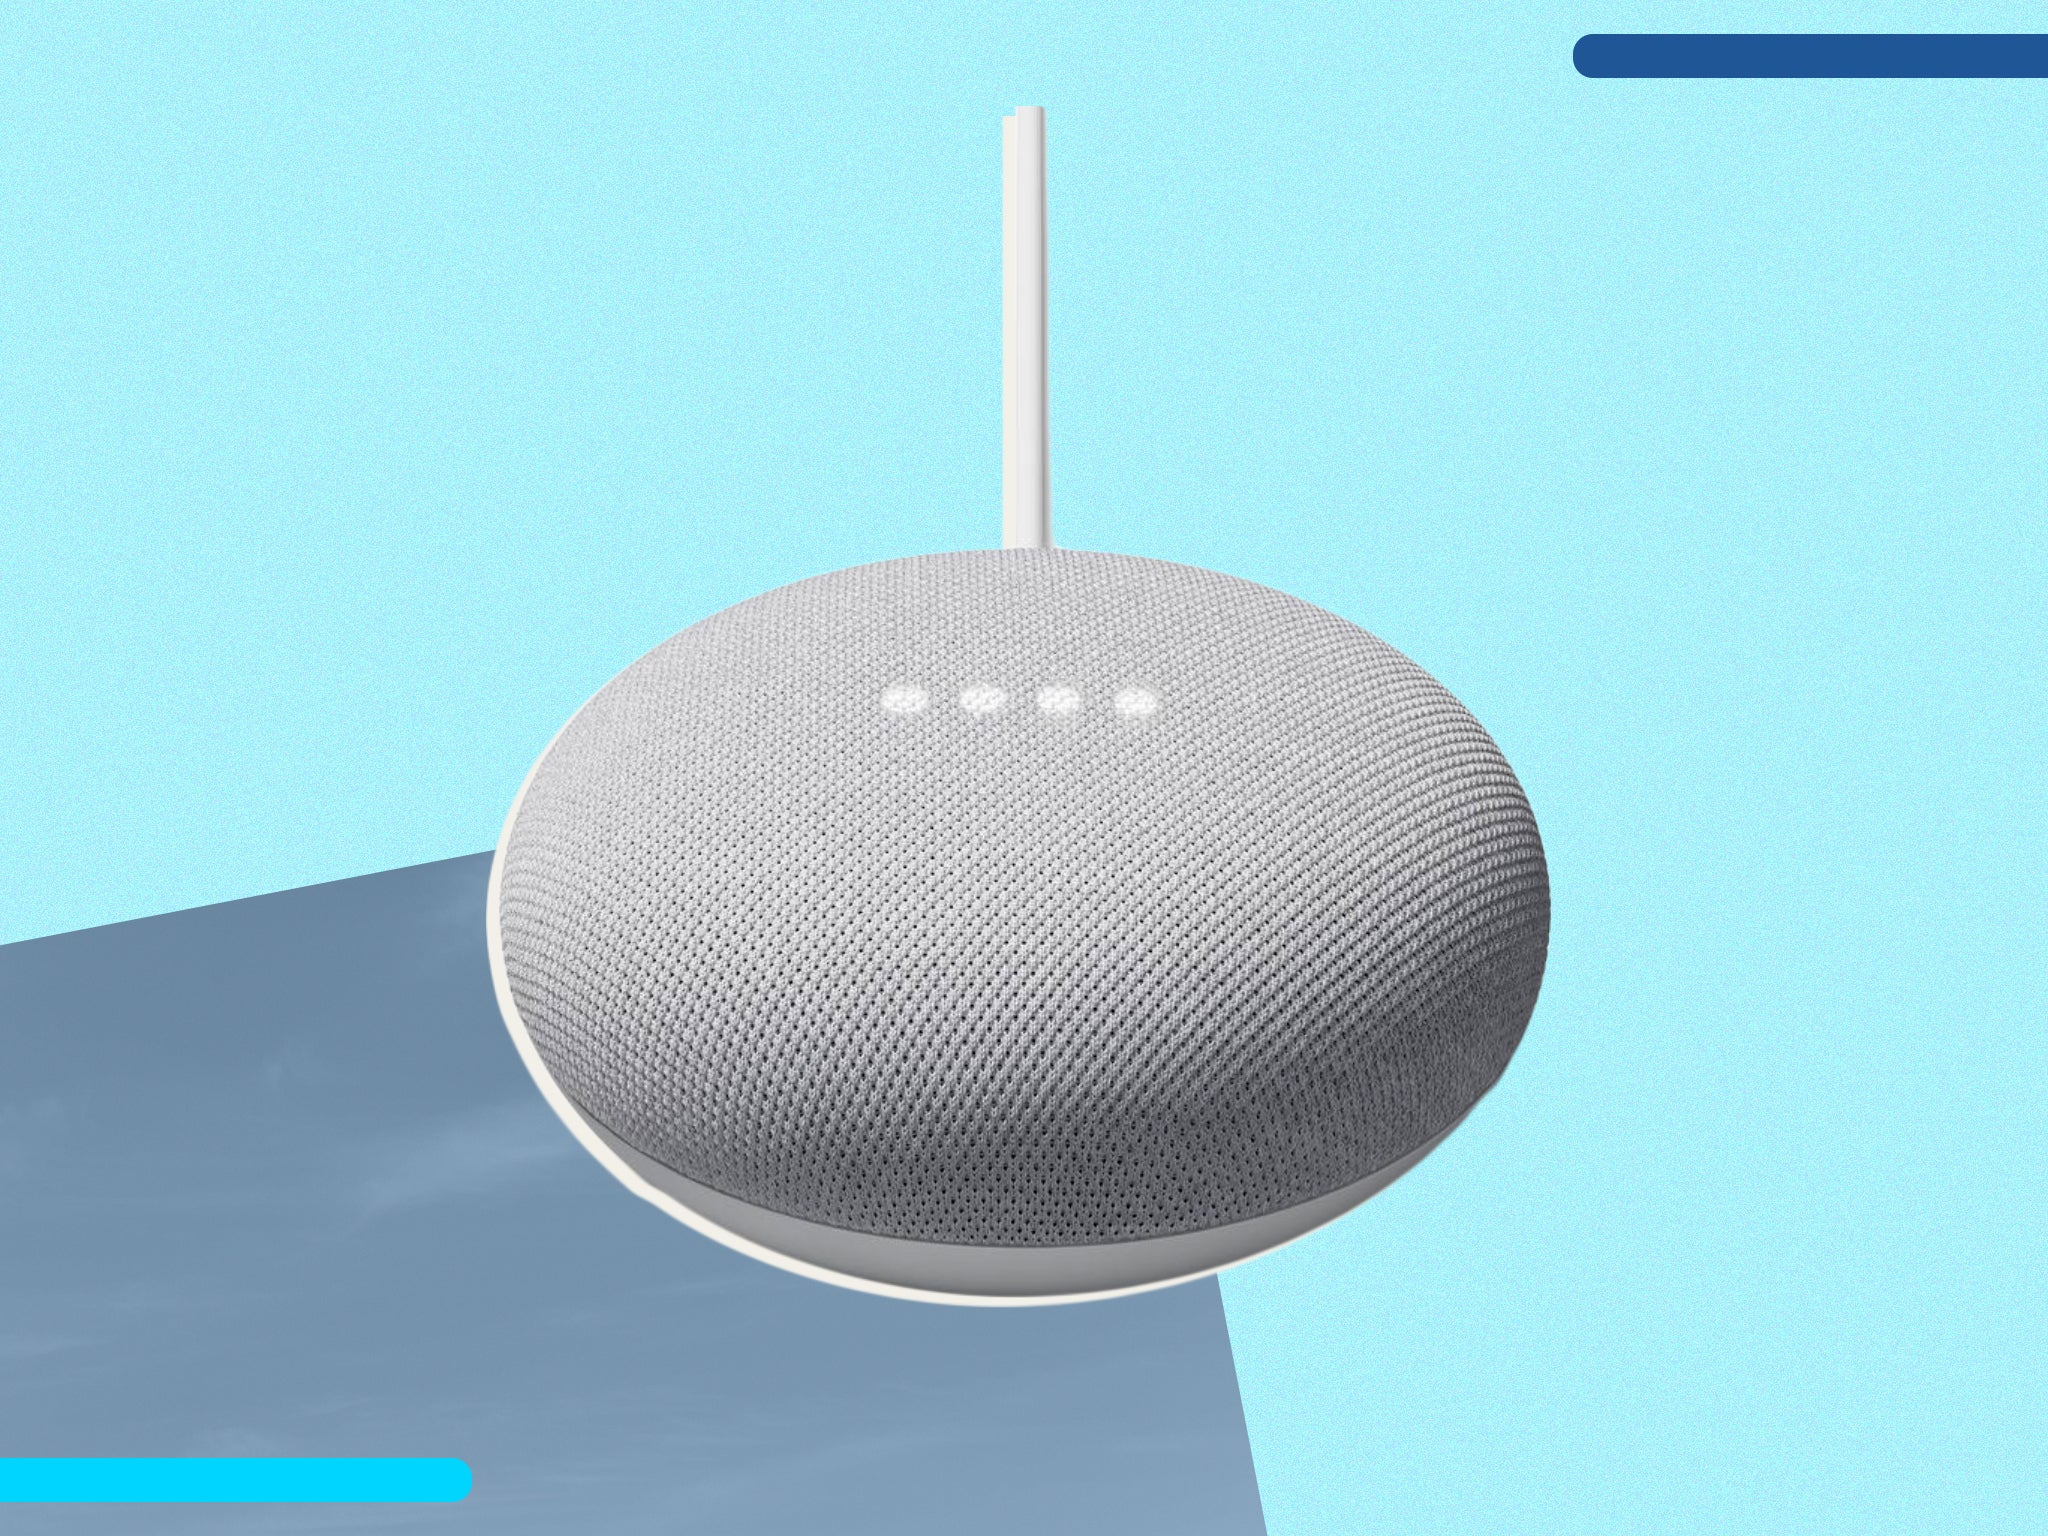 From design to sound, we put Google’s device to the test